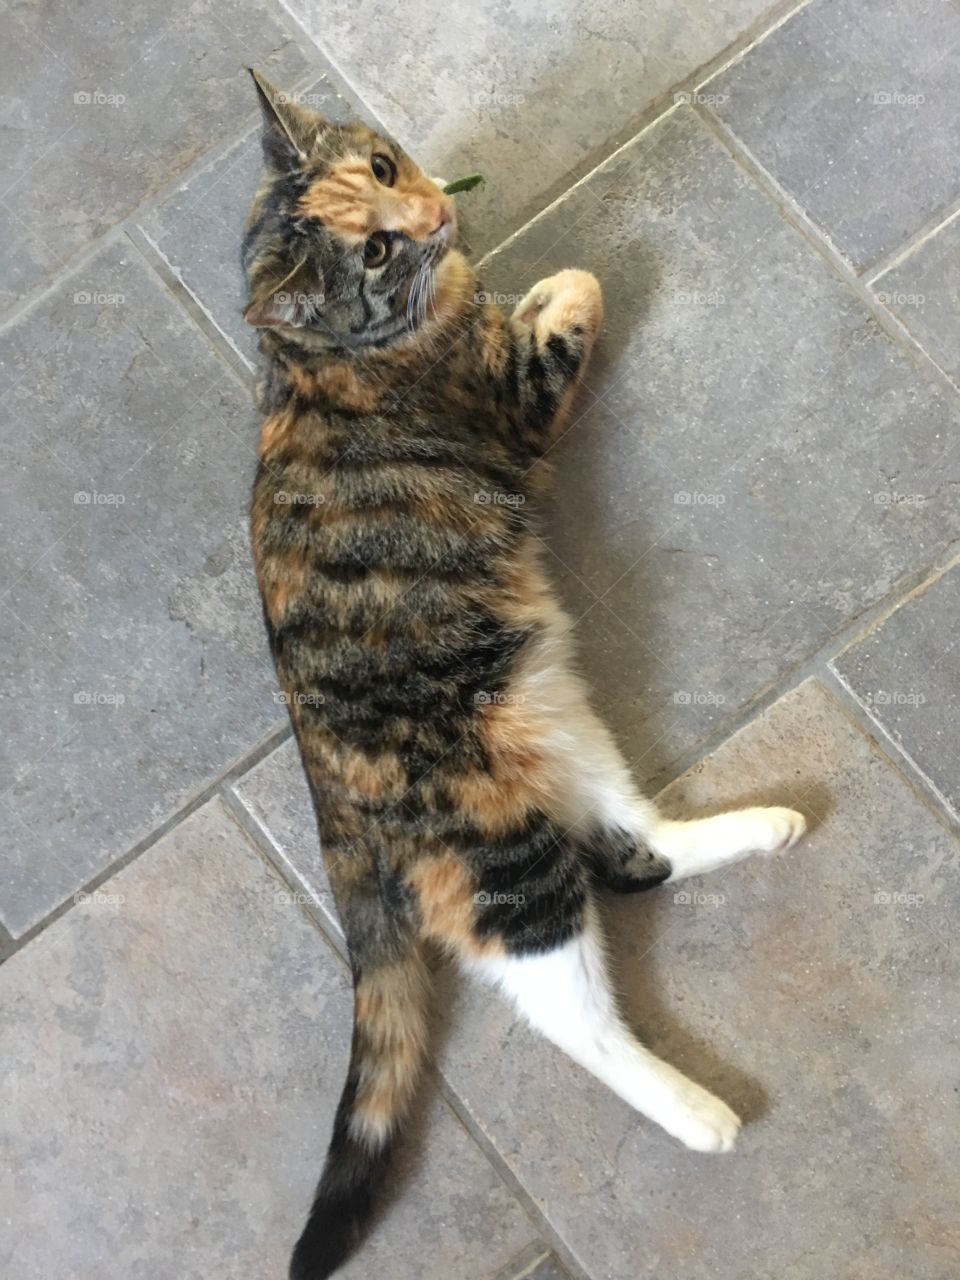 Cat is relaxing on a tiled floor 